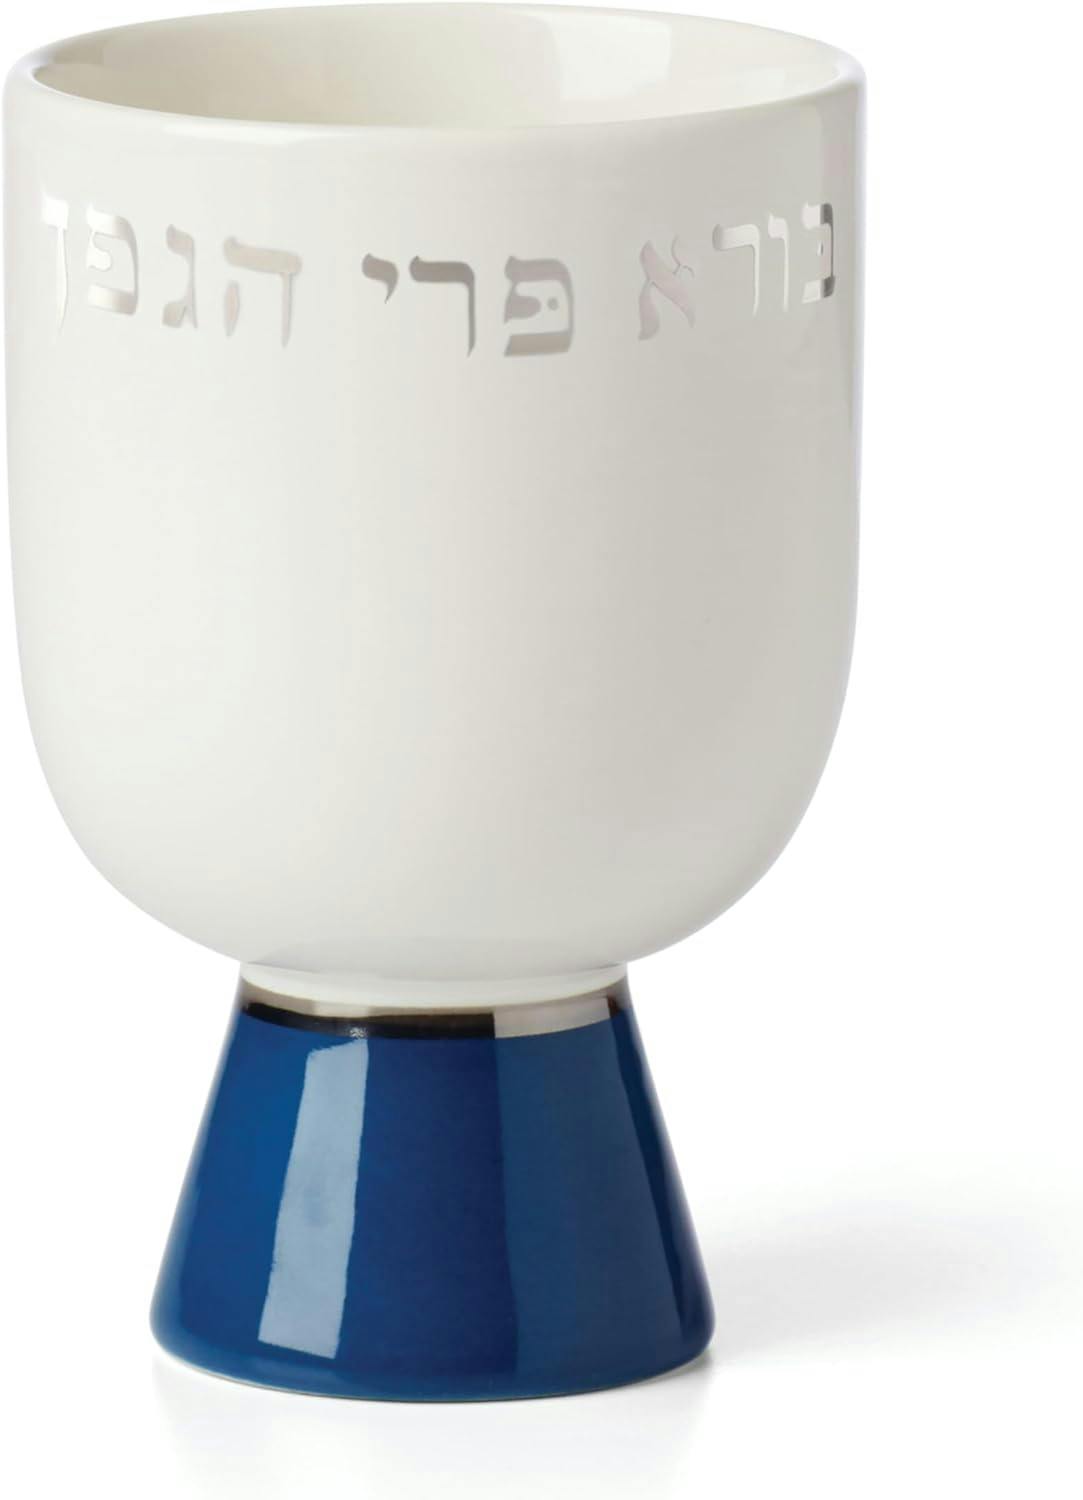 Holiday Shabbat Porcelain Kiddush Cup with Gold Lettering